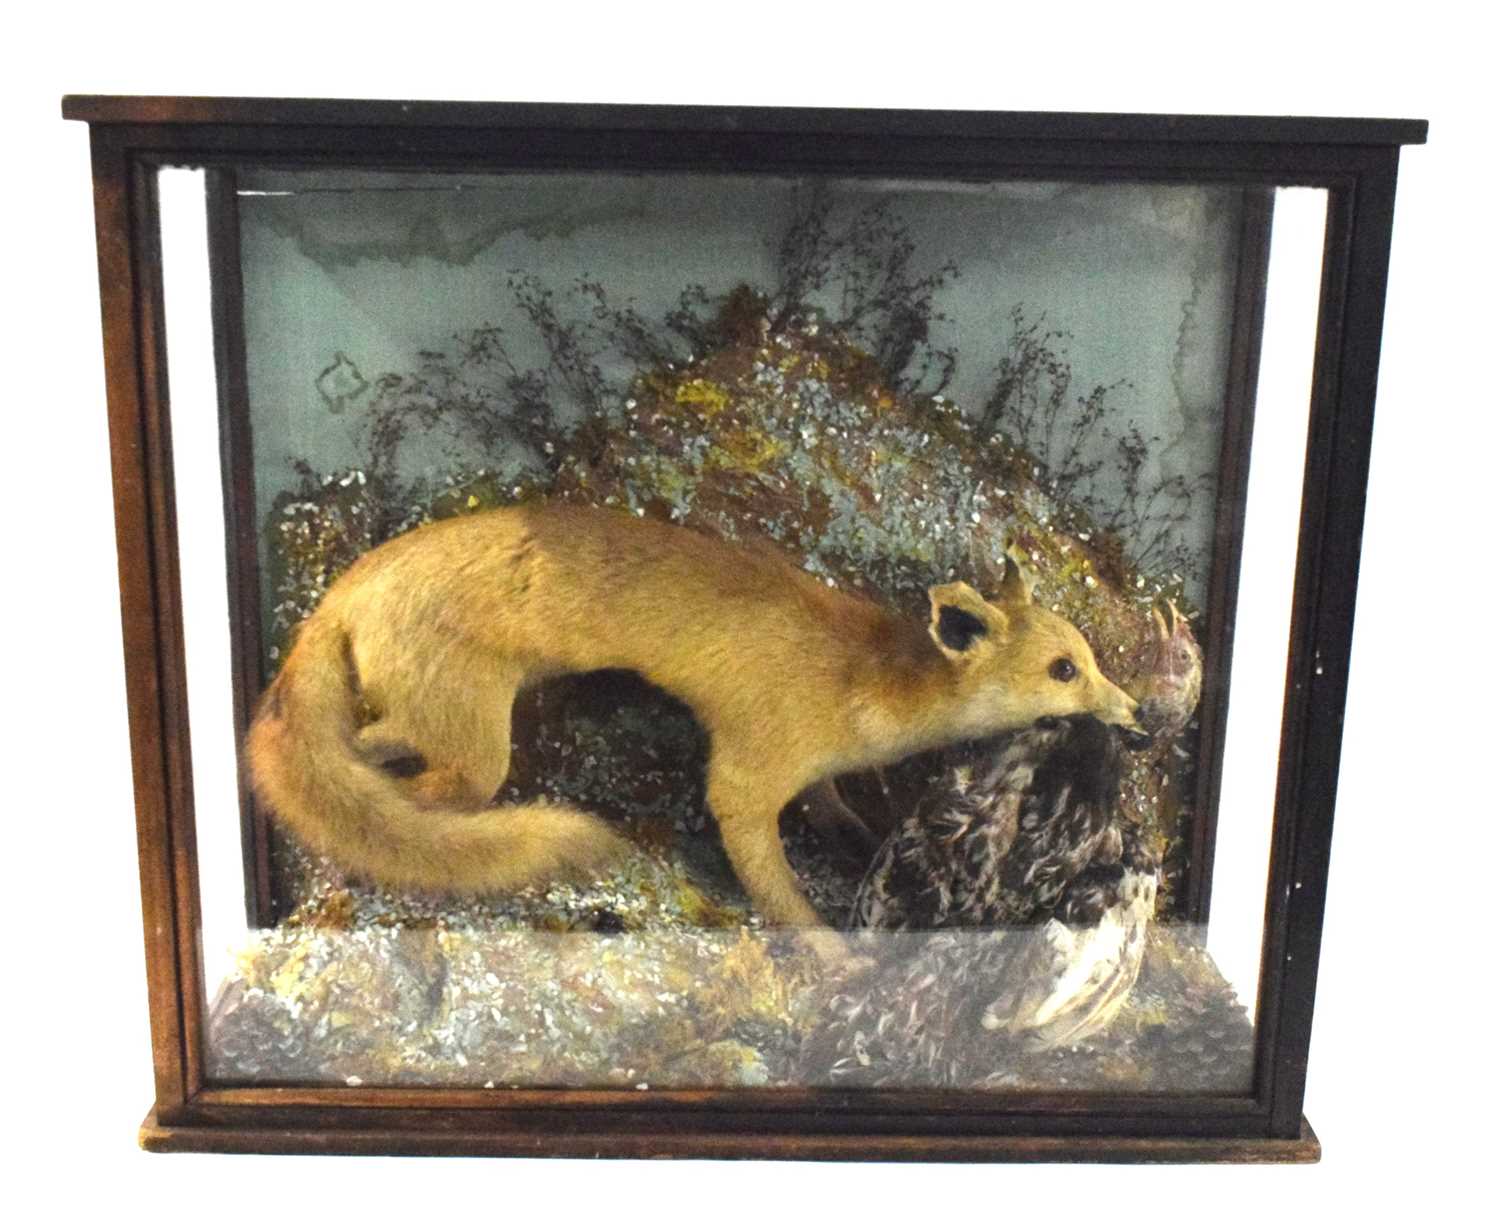 Late 19th / Early 20th century taxidermy cased Fox (vulpes vulpes) attacking a chicken, set in